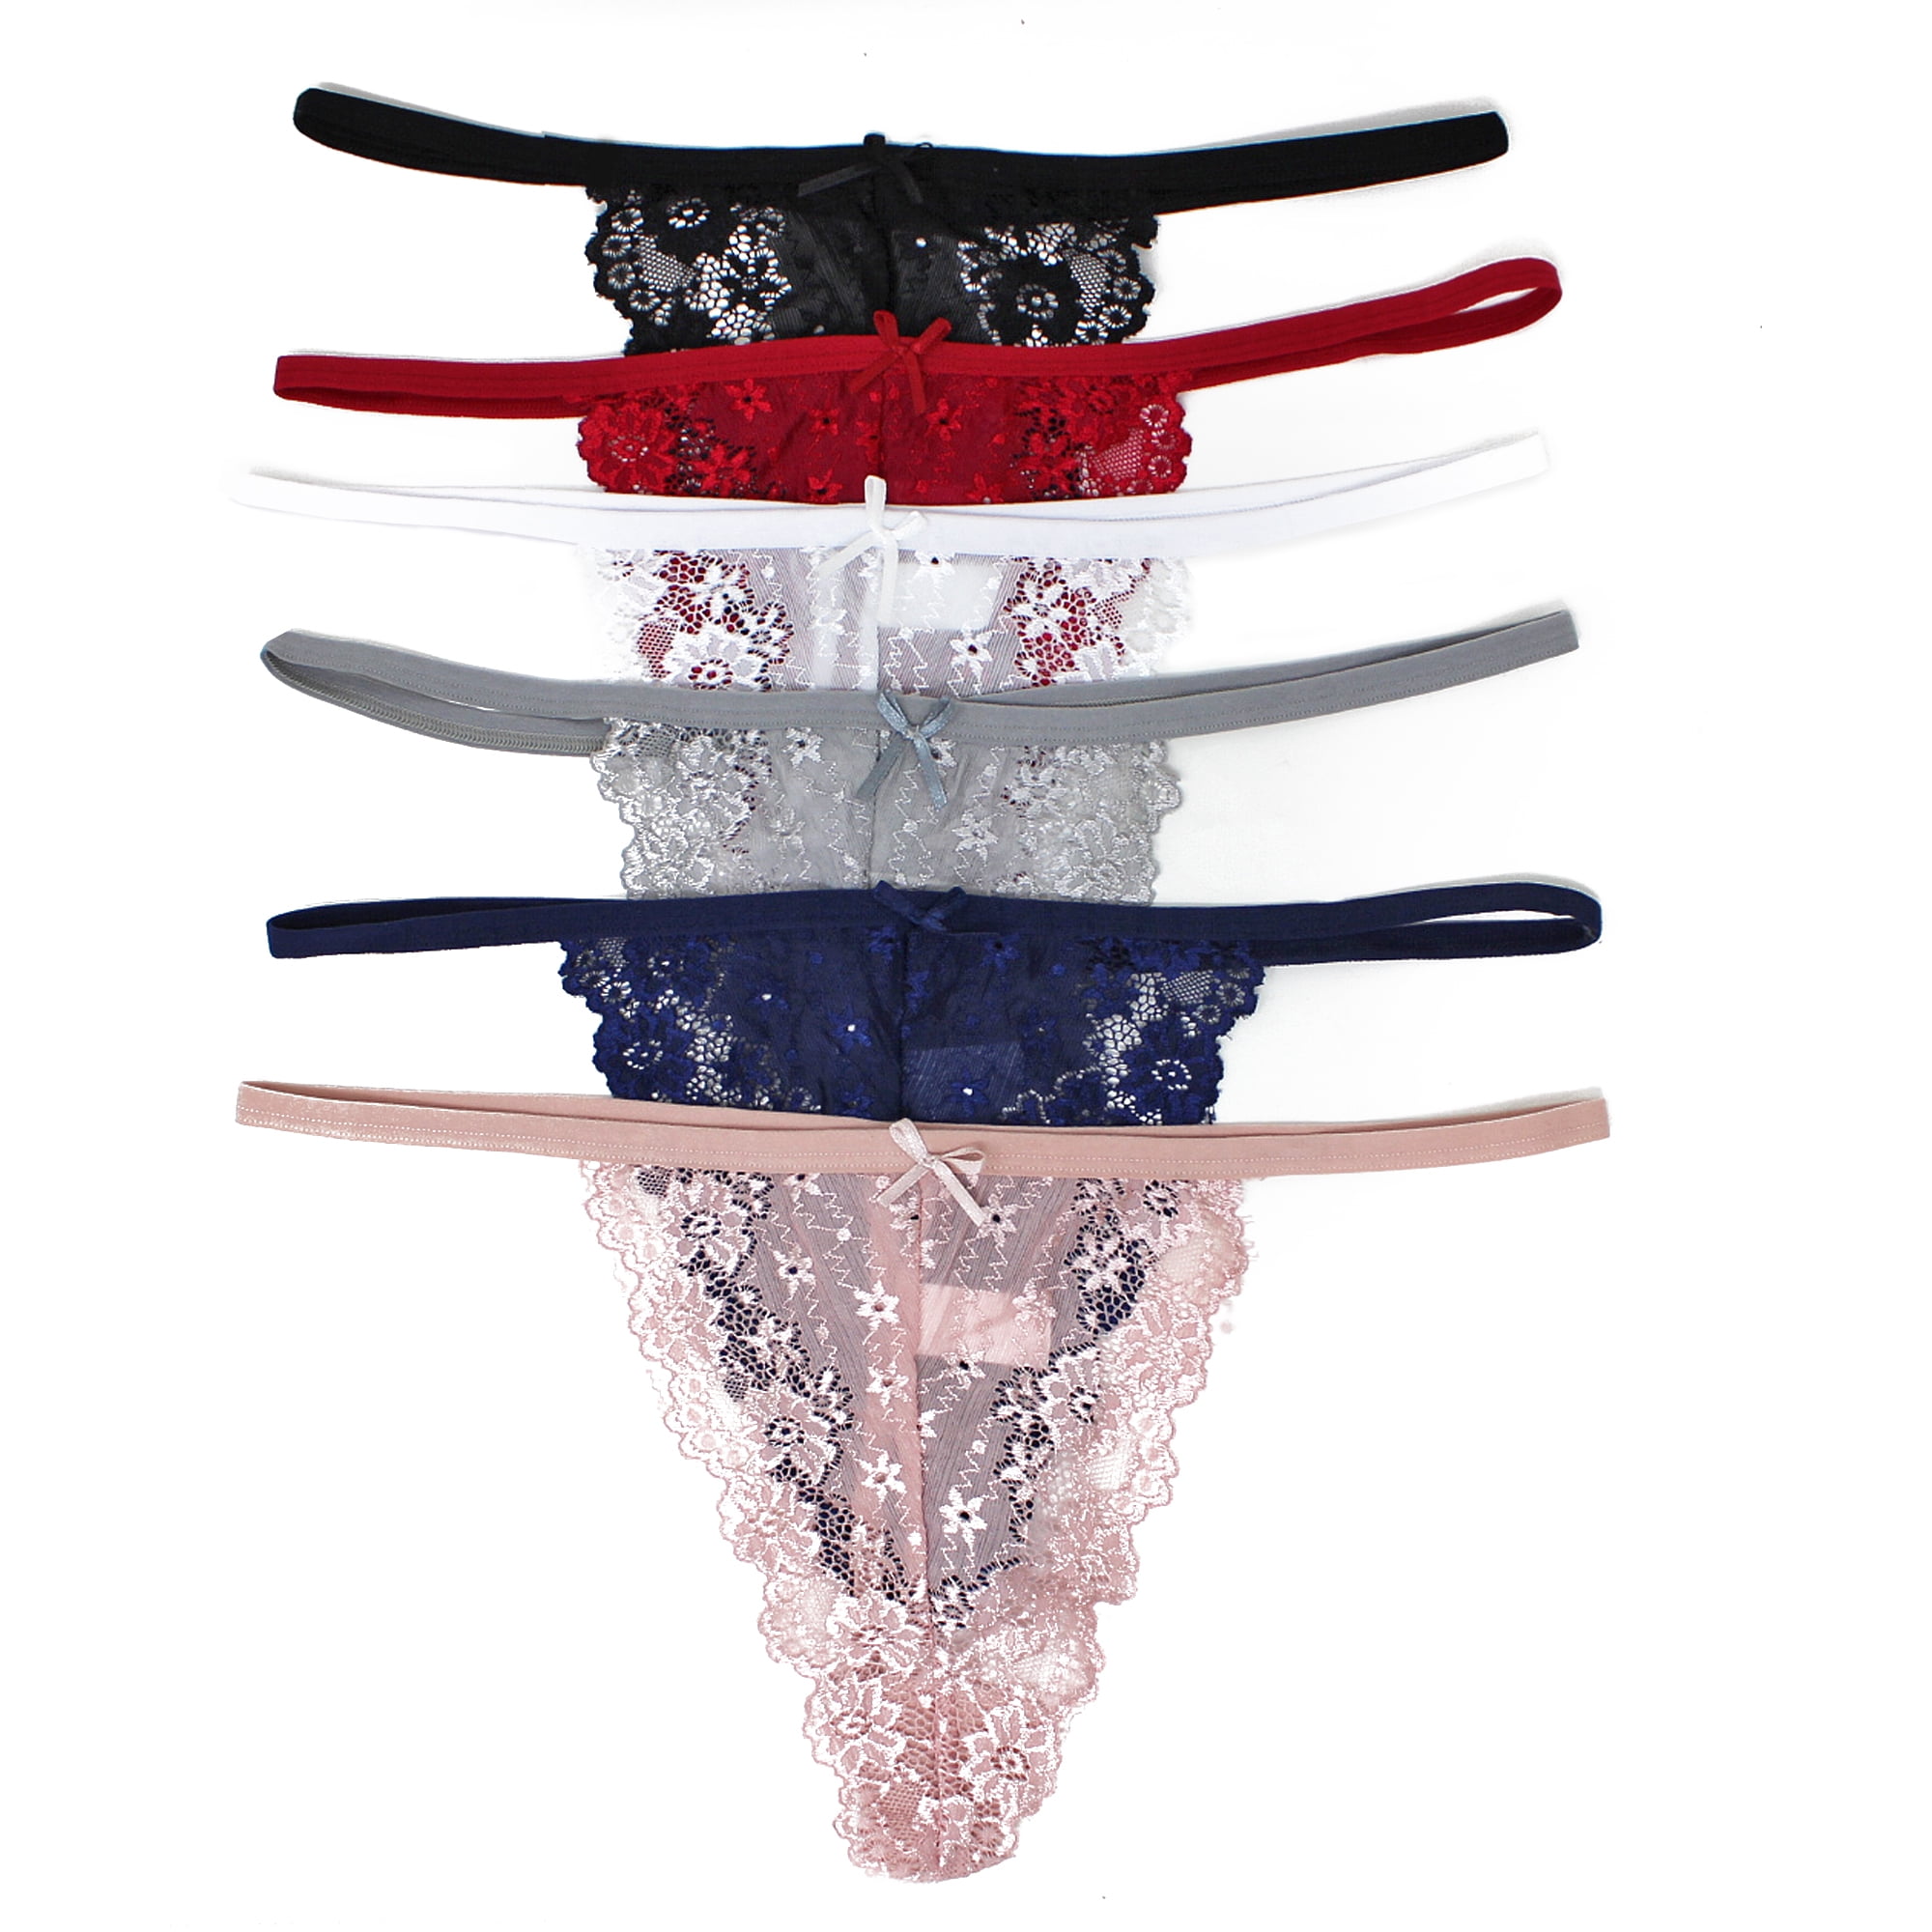 LAVRA Womens Underwear Lace Panties | Plus Size sexy panties & Boyshorts |  Ladies Brief cheeky underwear for women Hipster Multi Pack